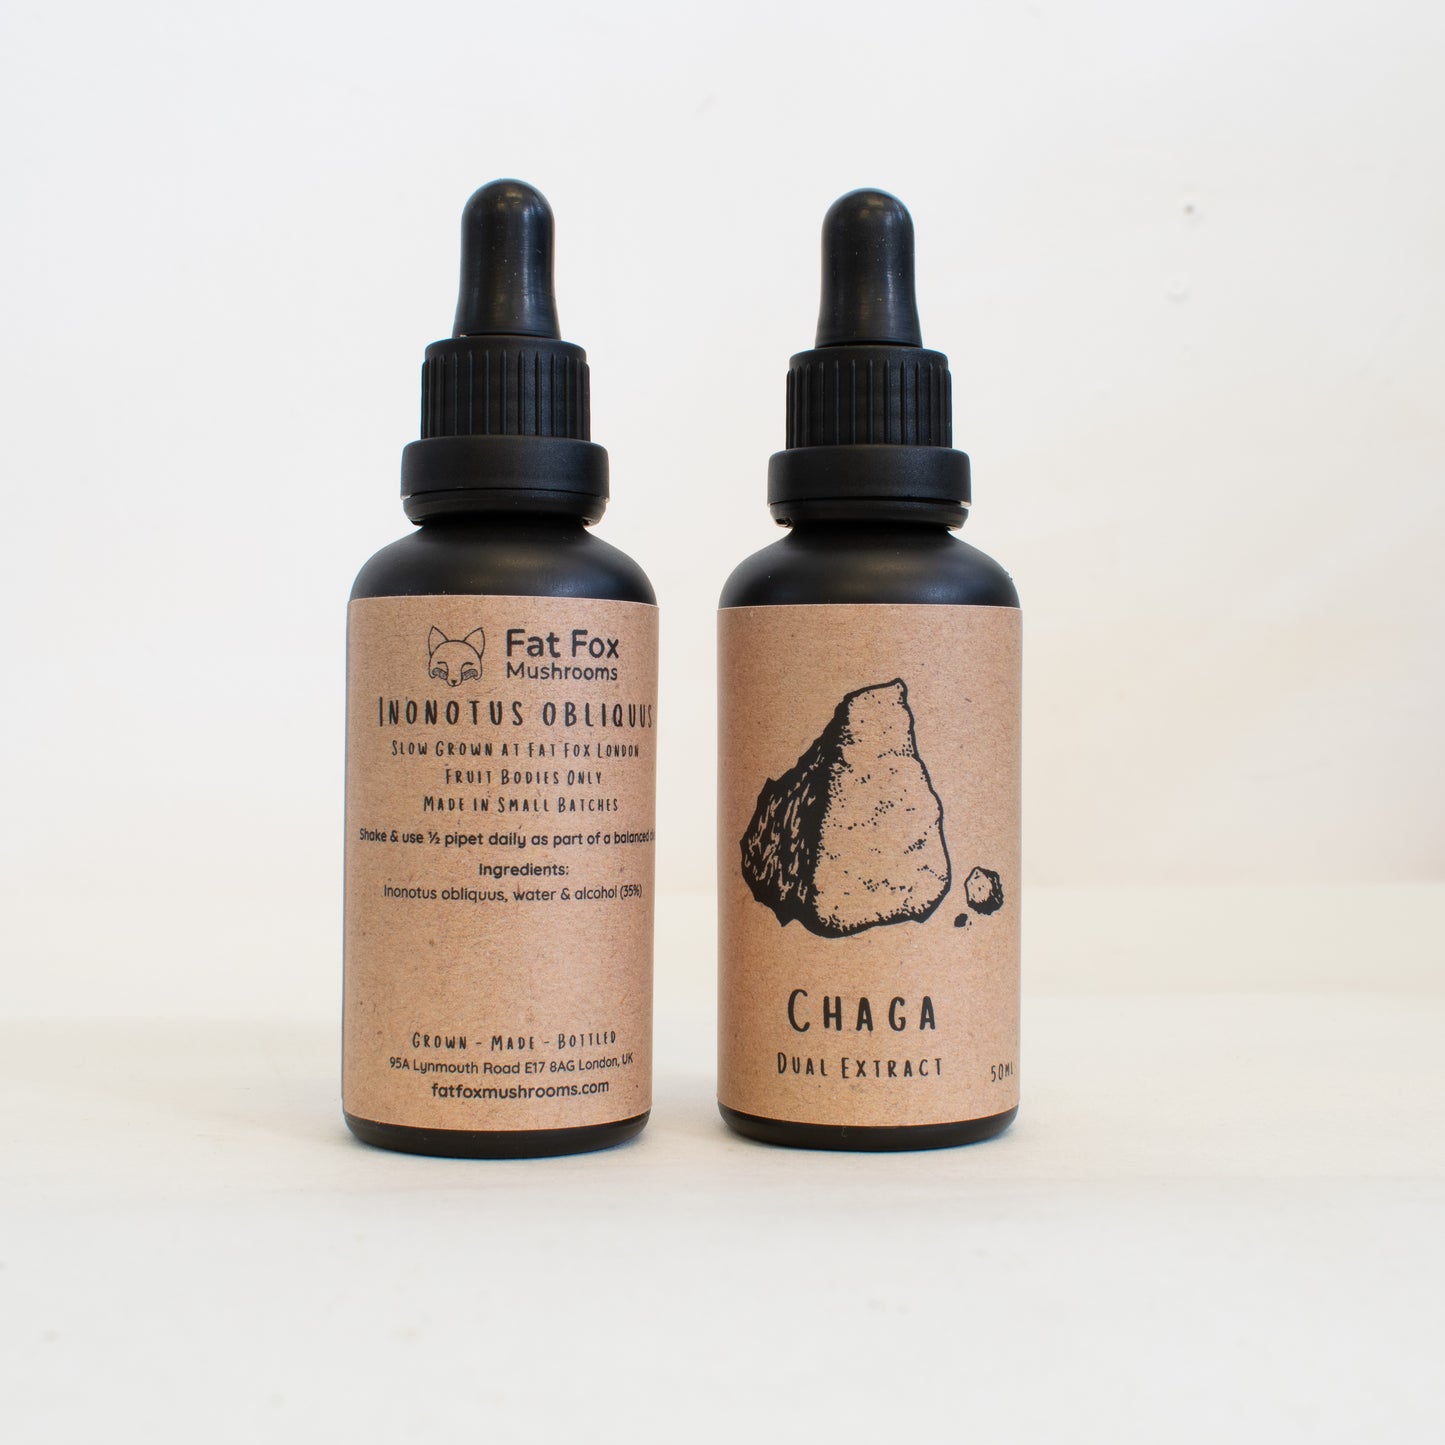 Chaga dual-extract tincture made by Fat Fox Mushrooms.